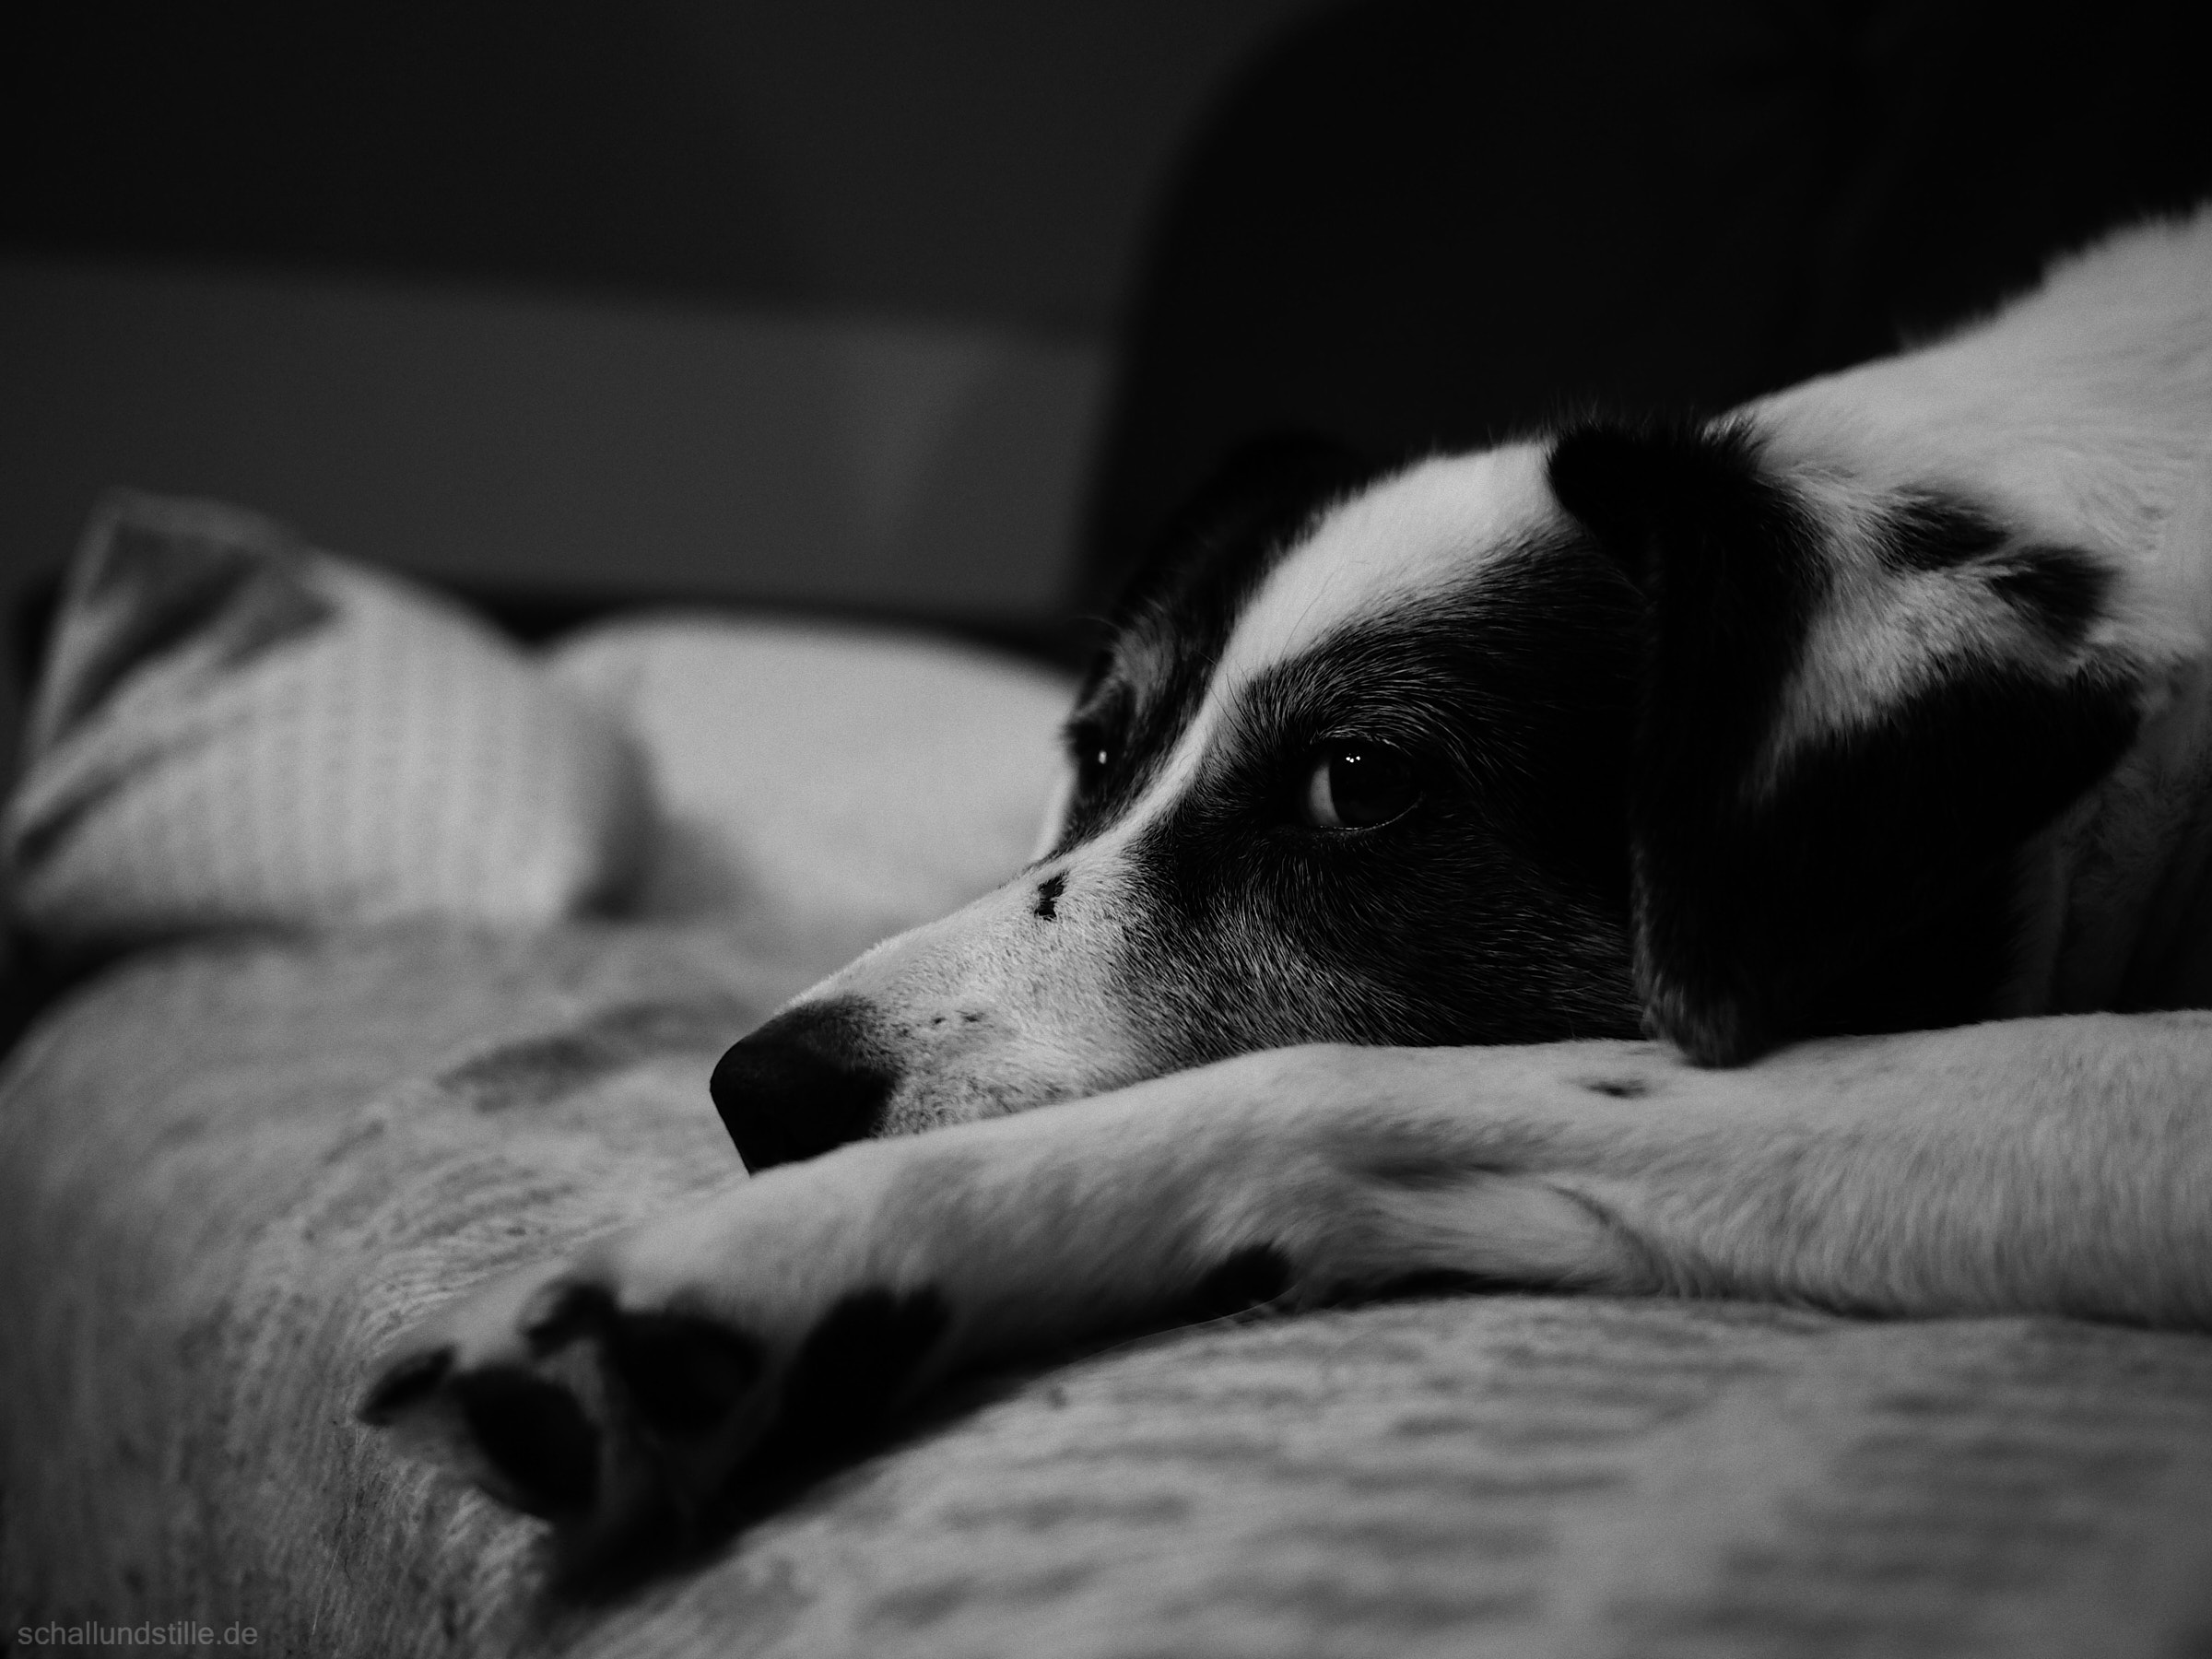 black and white portrait of a black and white dog resting on a sofa